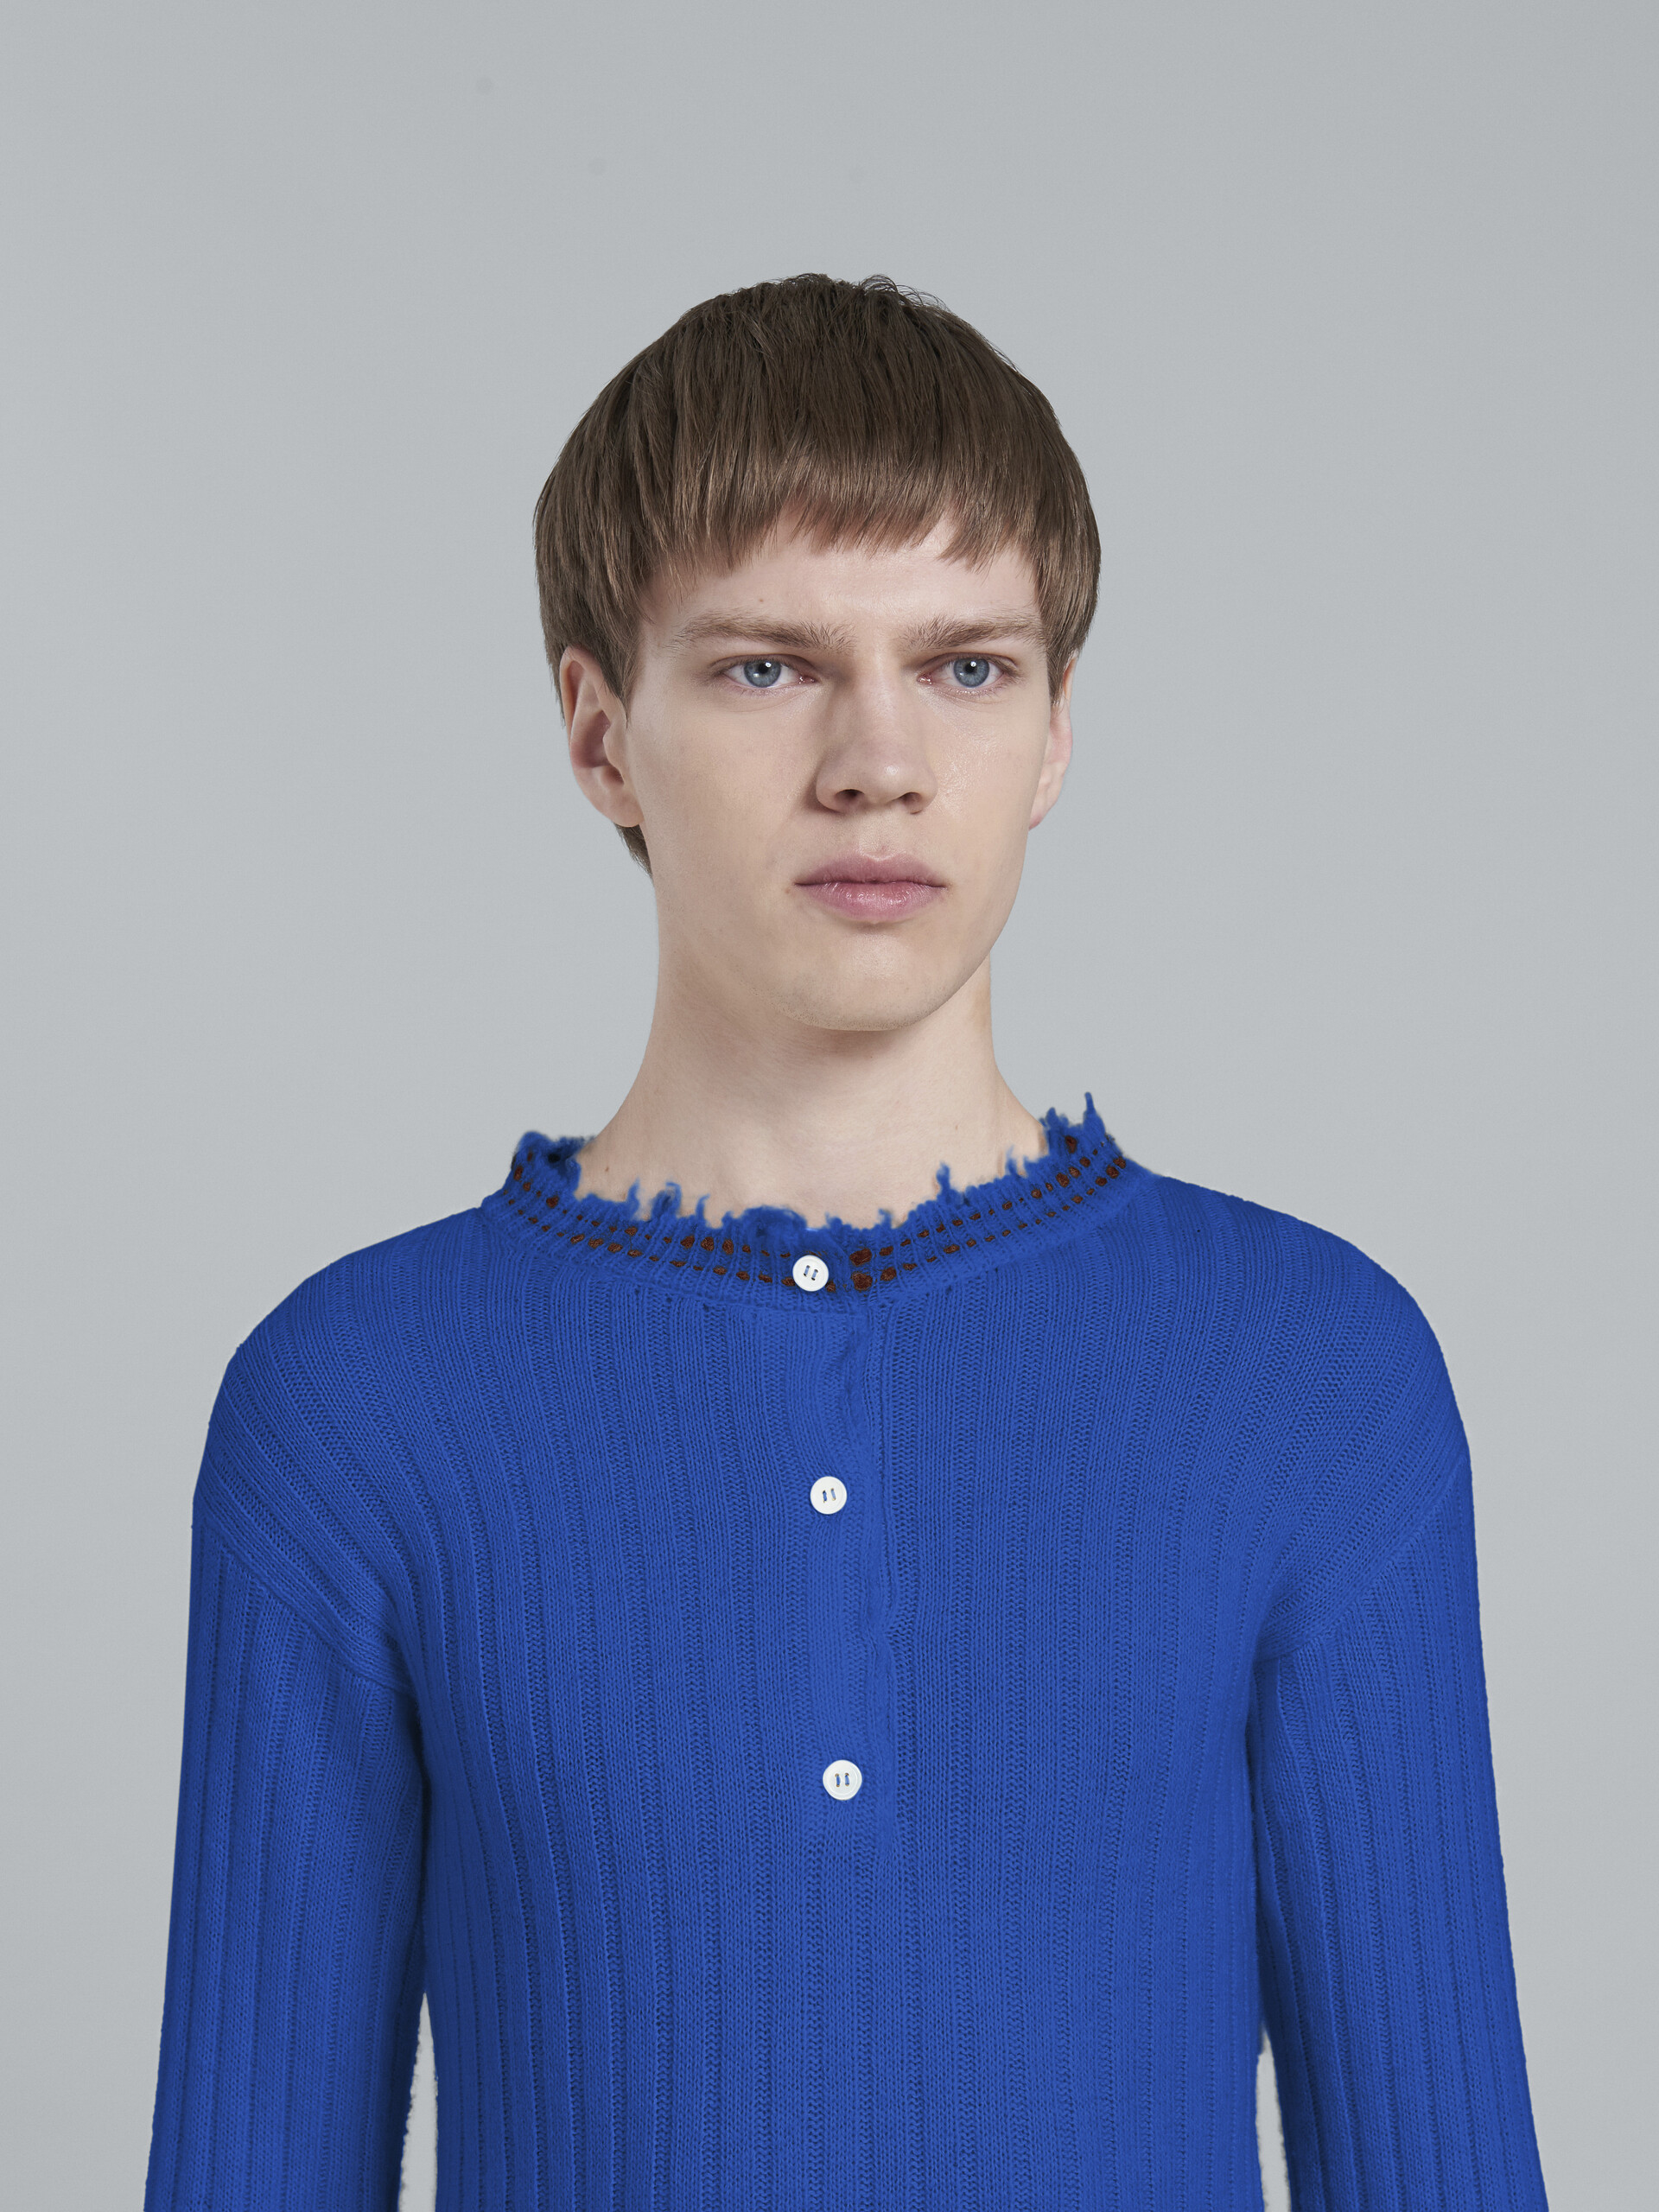 Blue knitted wool sweater - Pullovers - Image 4